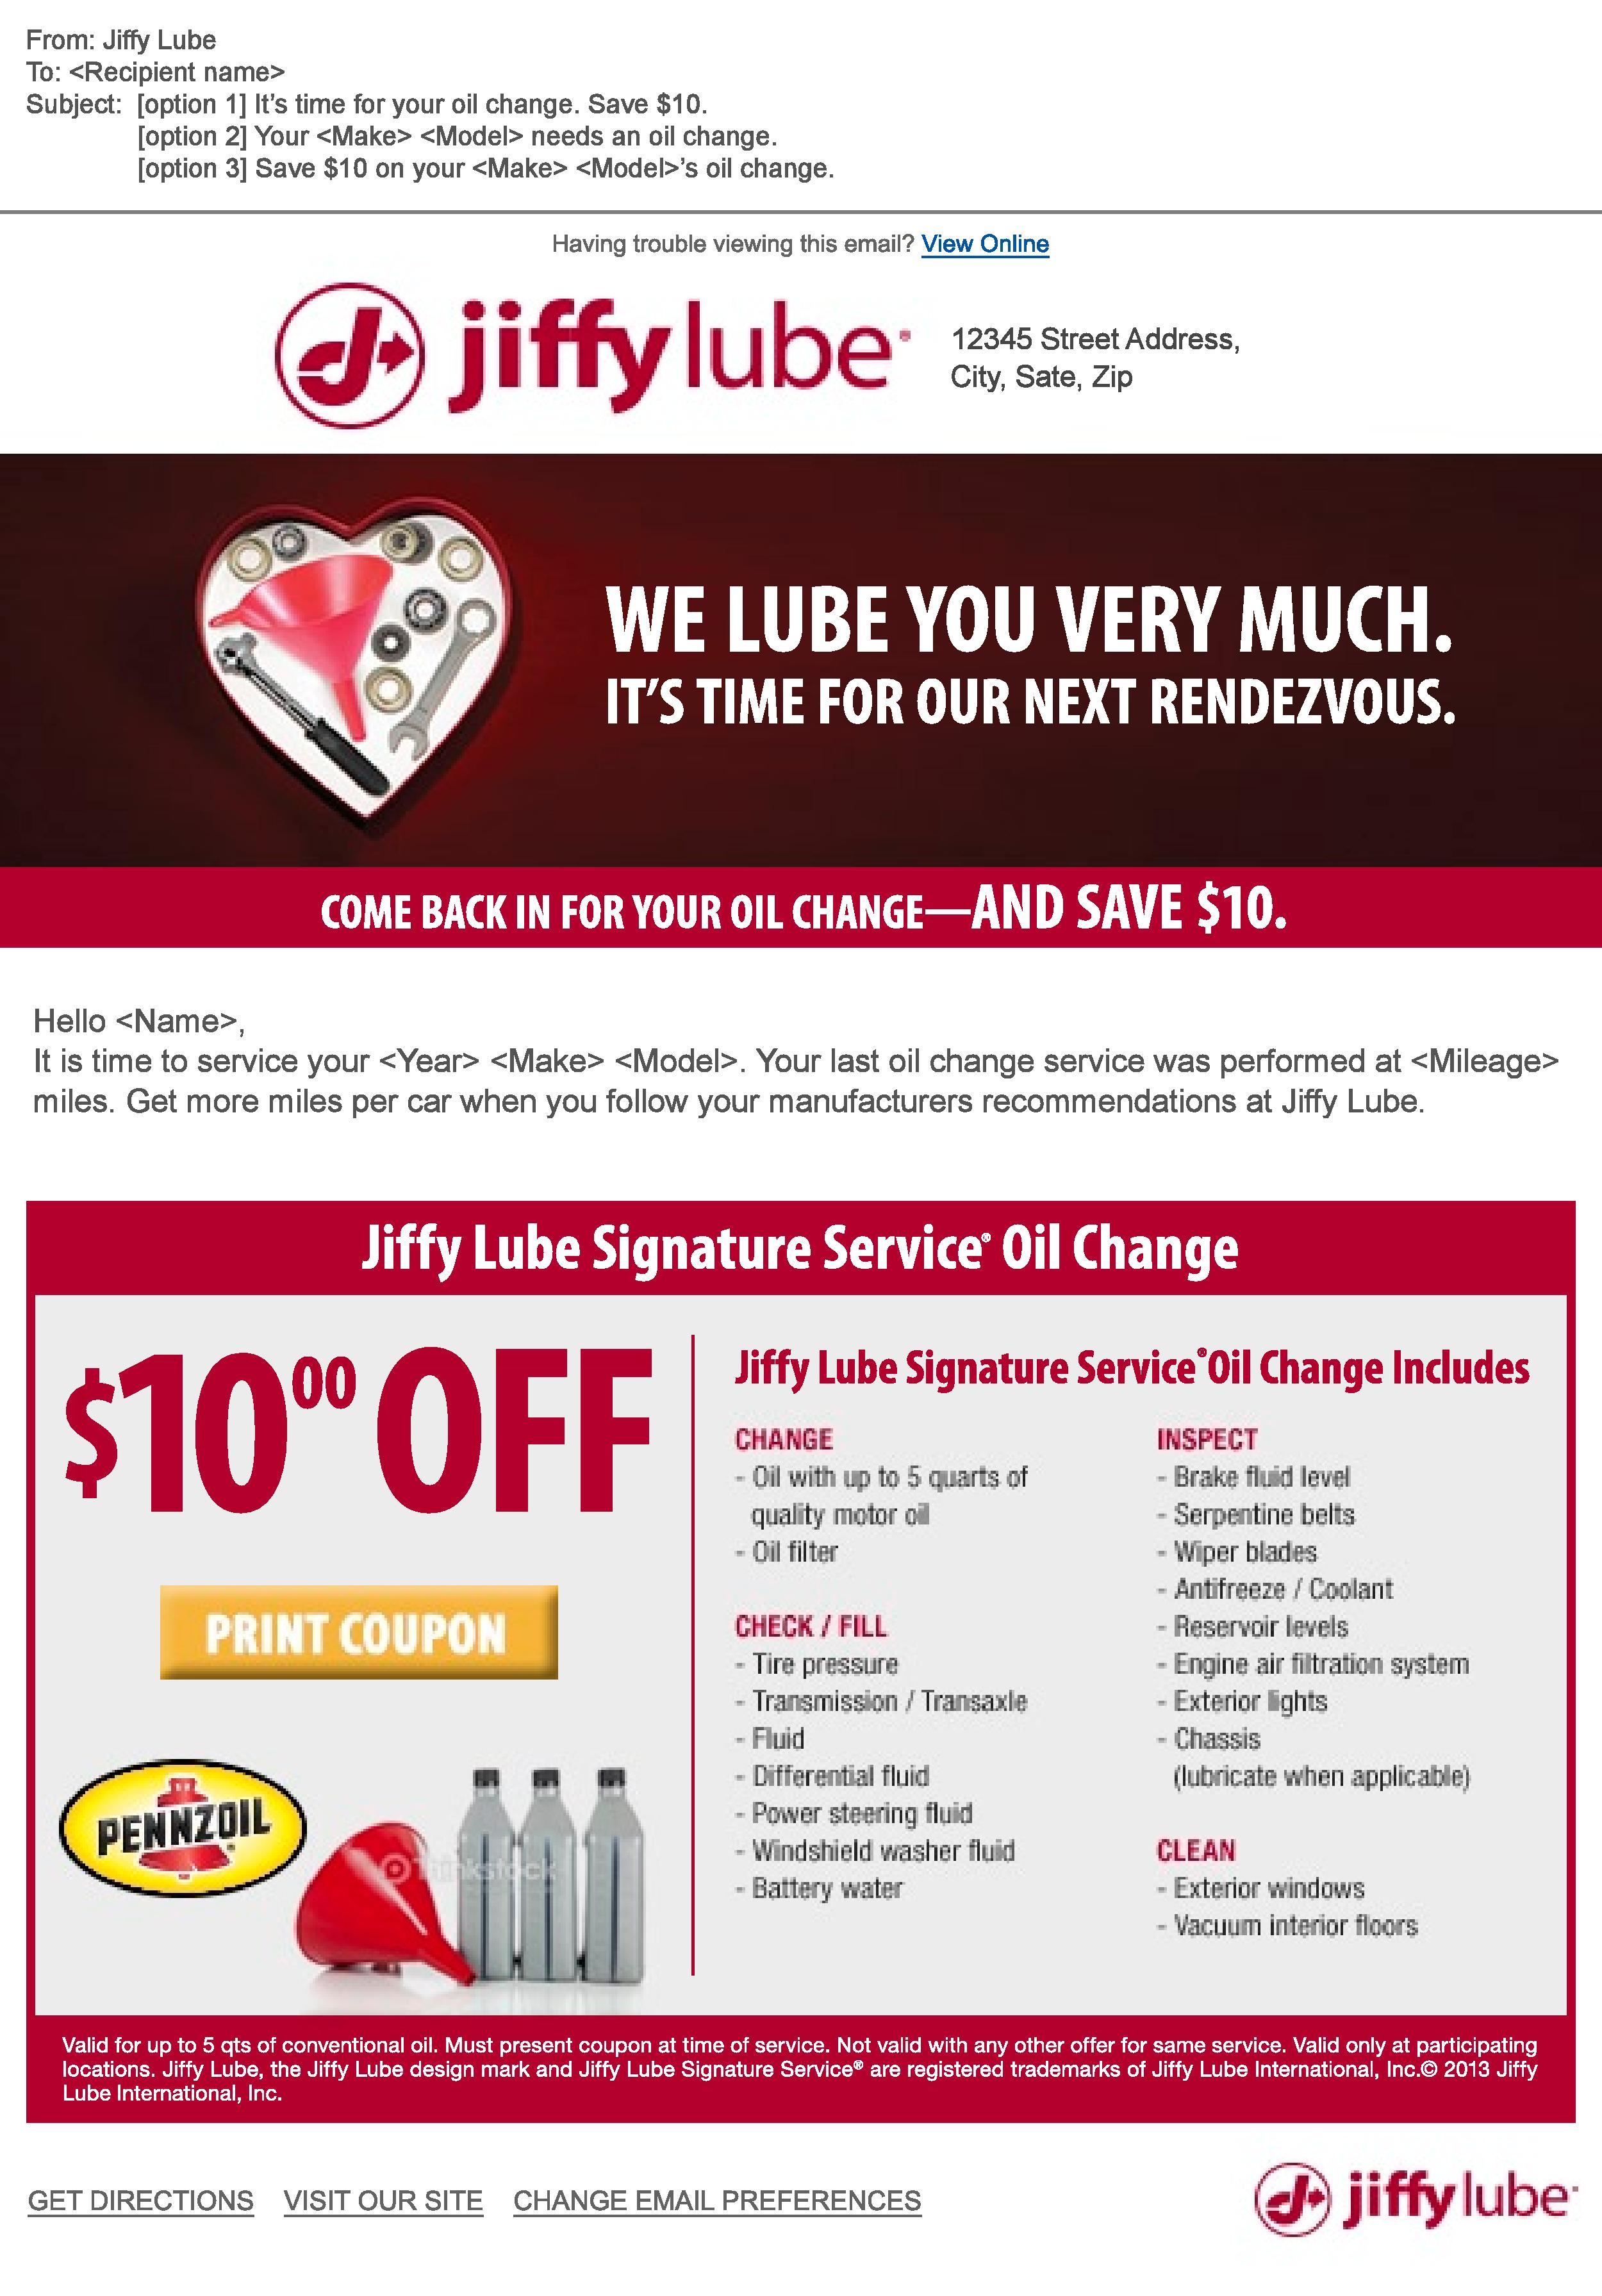 Jiffy Lube Reminder Email